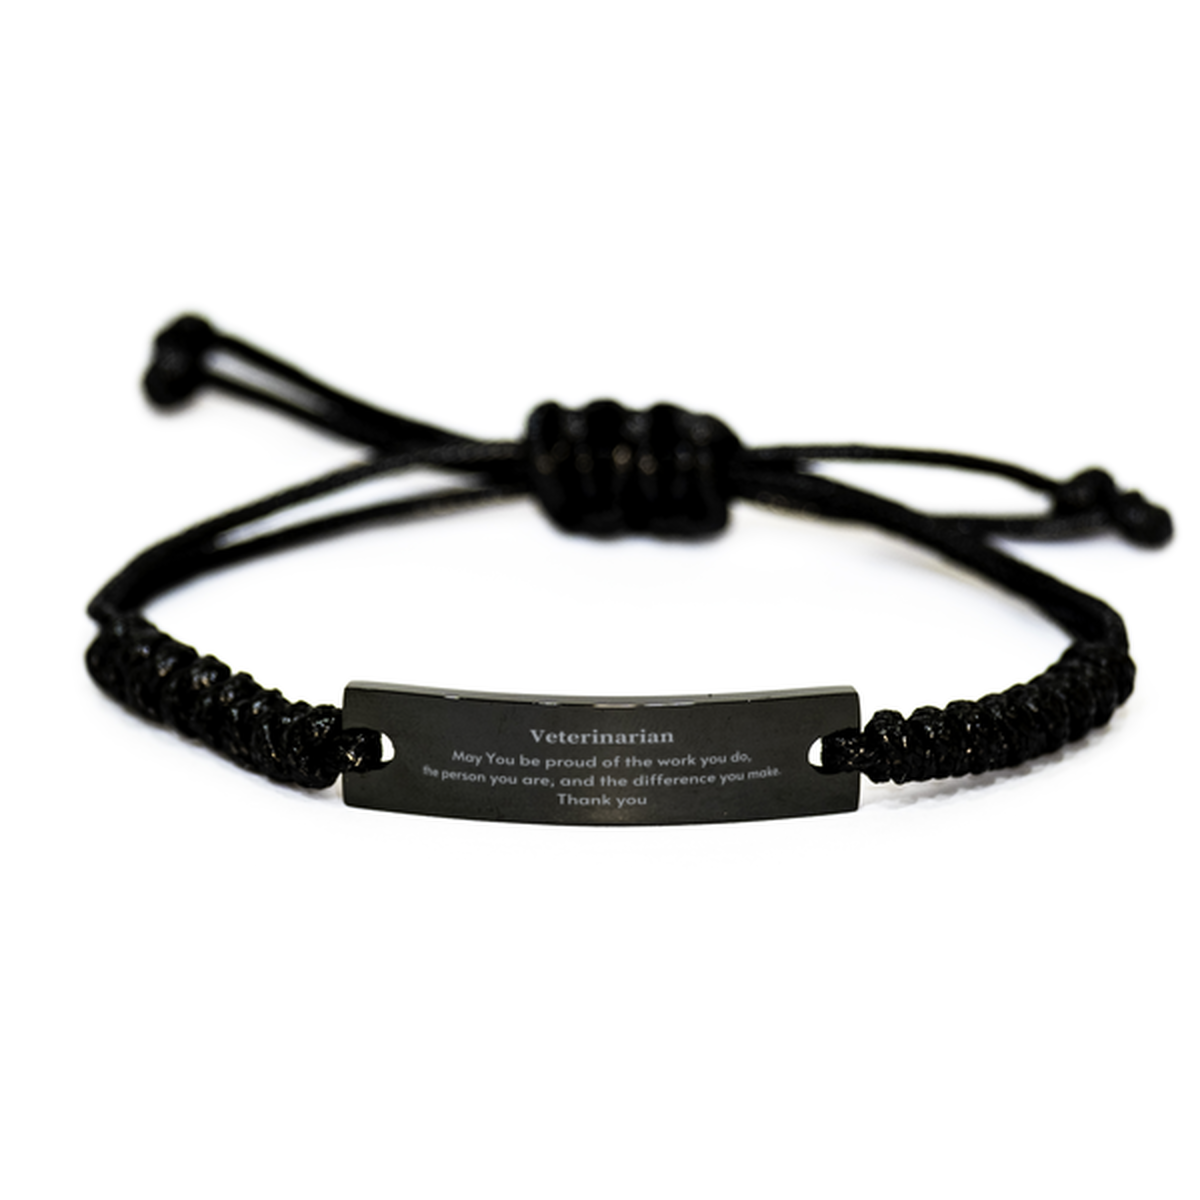 Heartwarming Black Rope Bracelet Retirement Coworkers Gifts for Veterinarian, Veterinarian May You be proud of the work you do, the person you are Gifts for Boss Men Women Friends